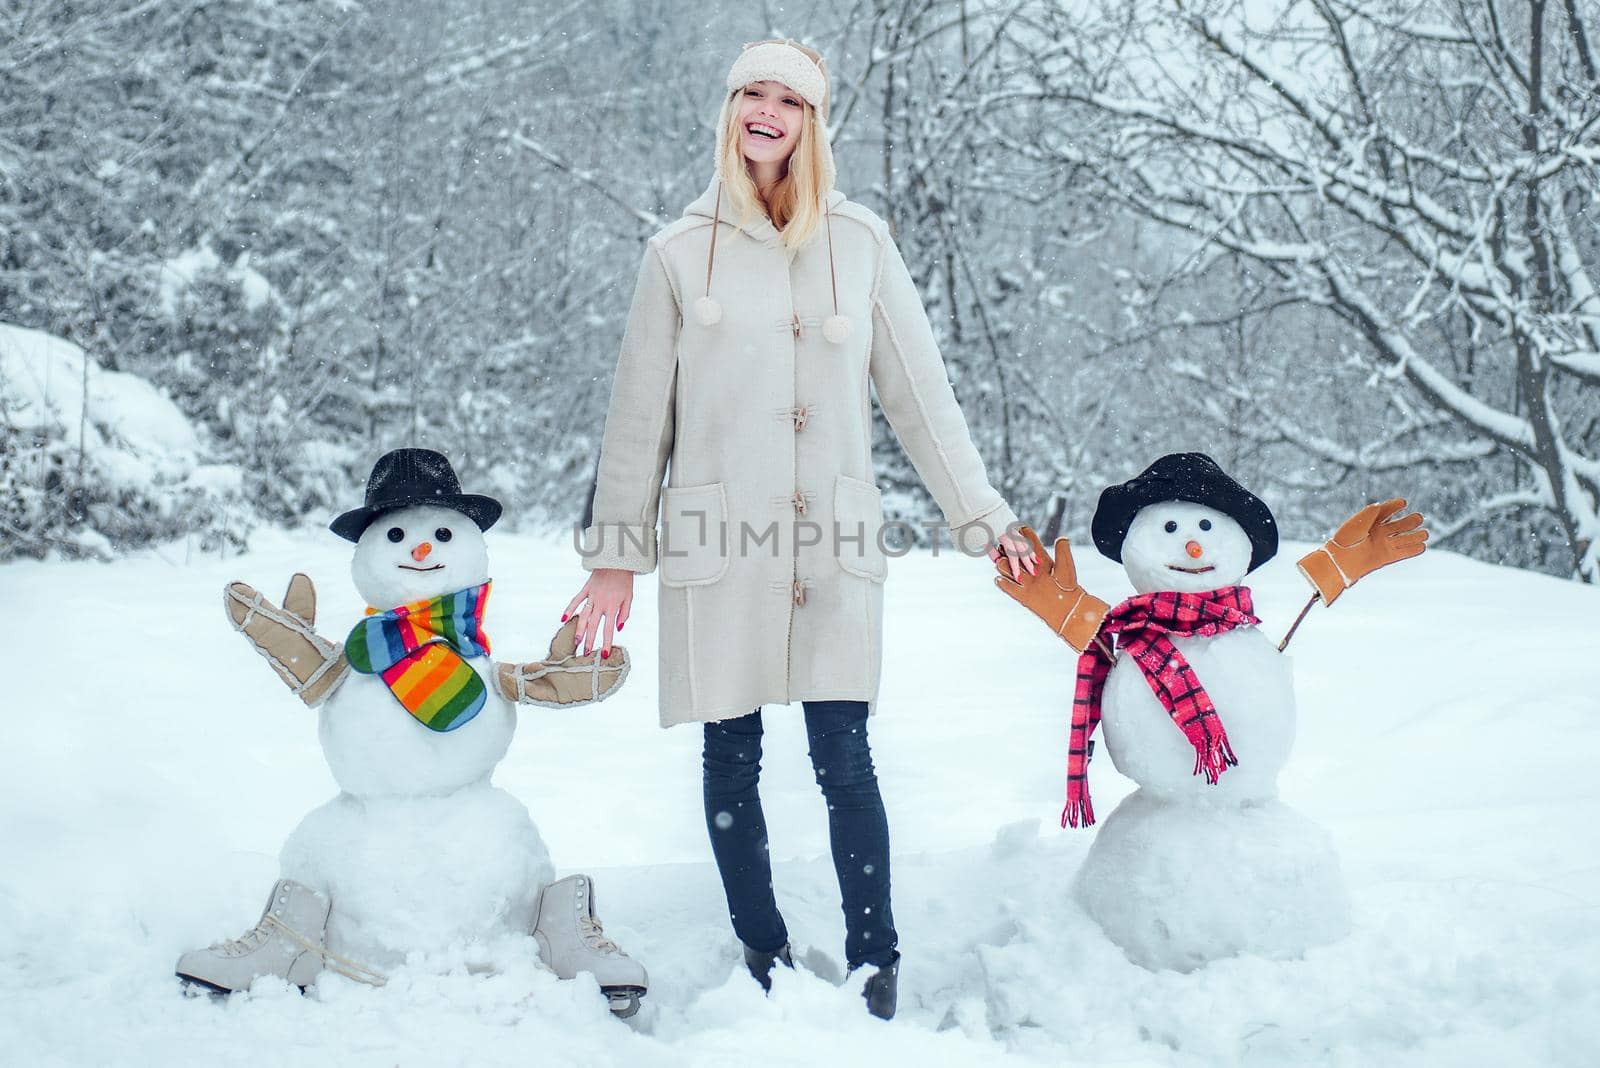 Winter woman. Funny Girl Love winter. Winter portrait of young woman in the winter snowy scenery. Cute girl making snowman on snowy field outdoor. by Tverdokhlib